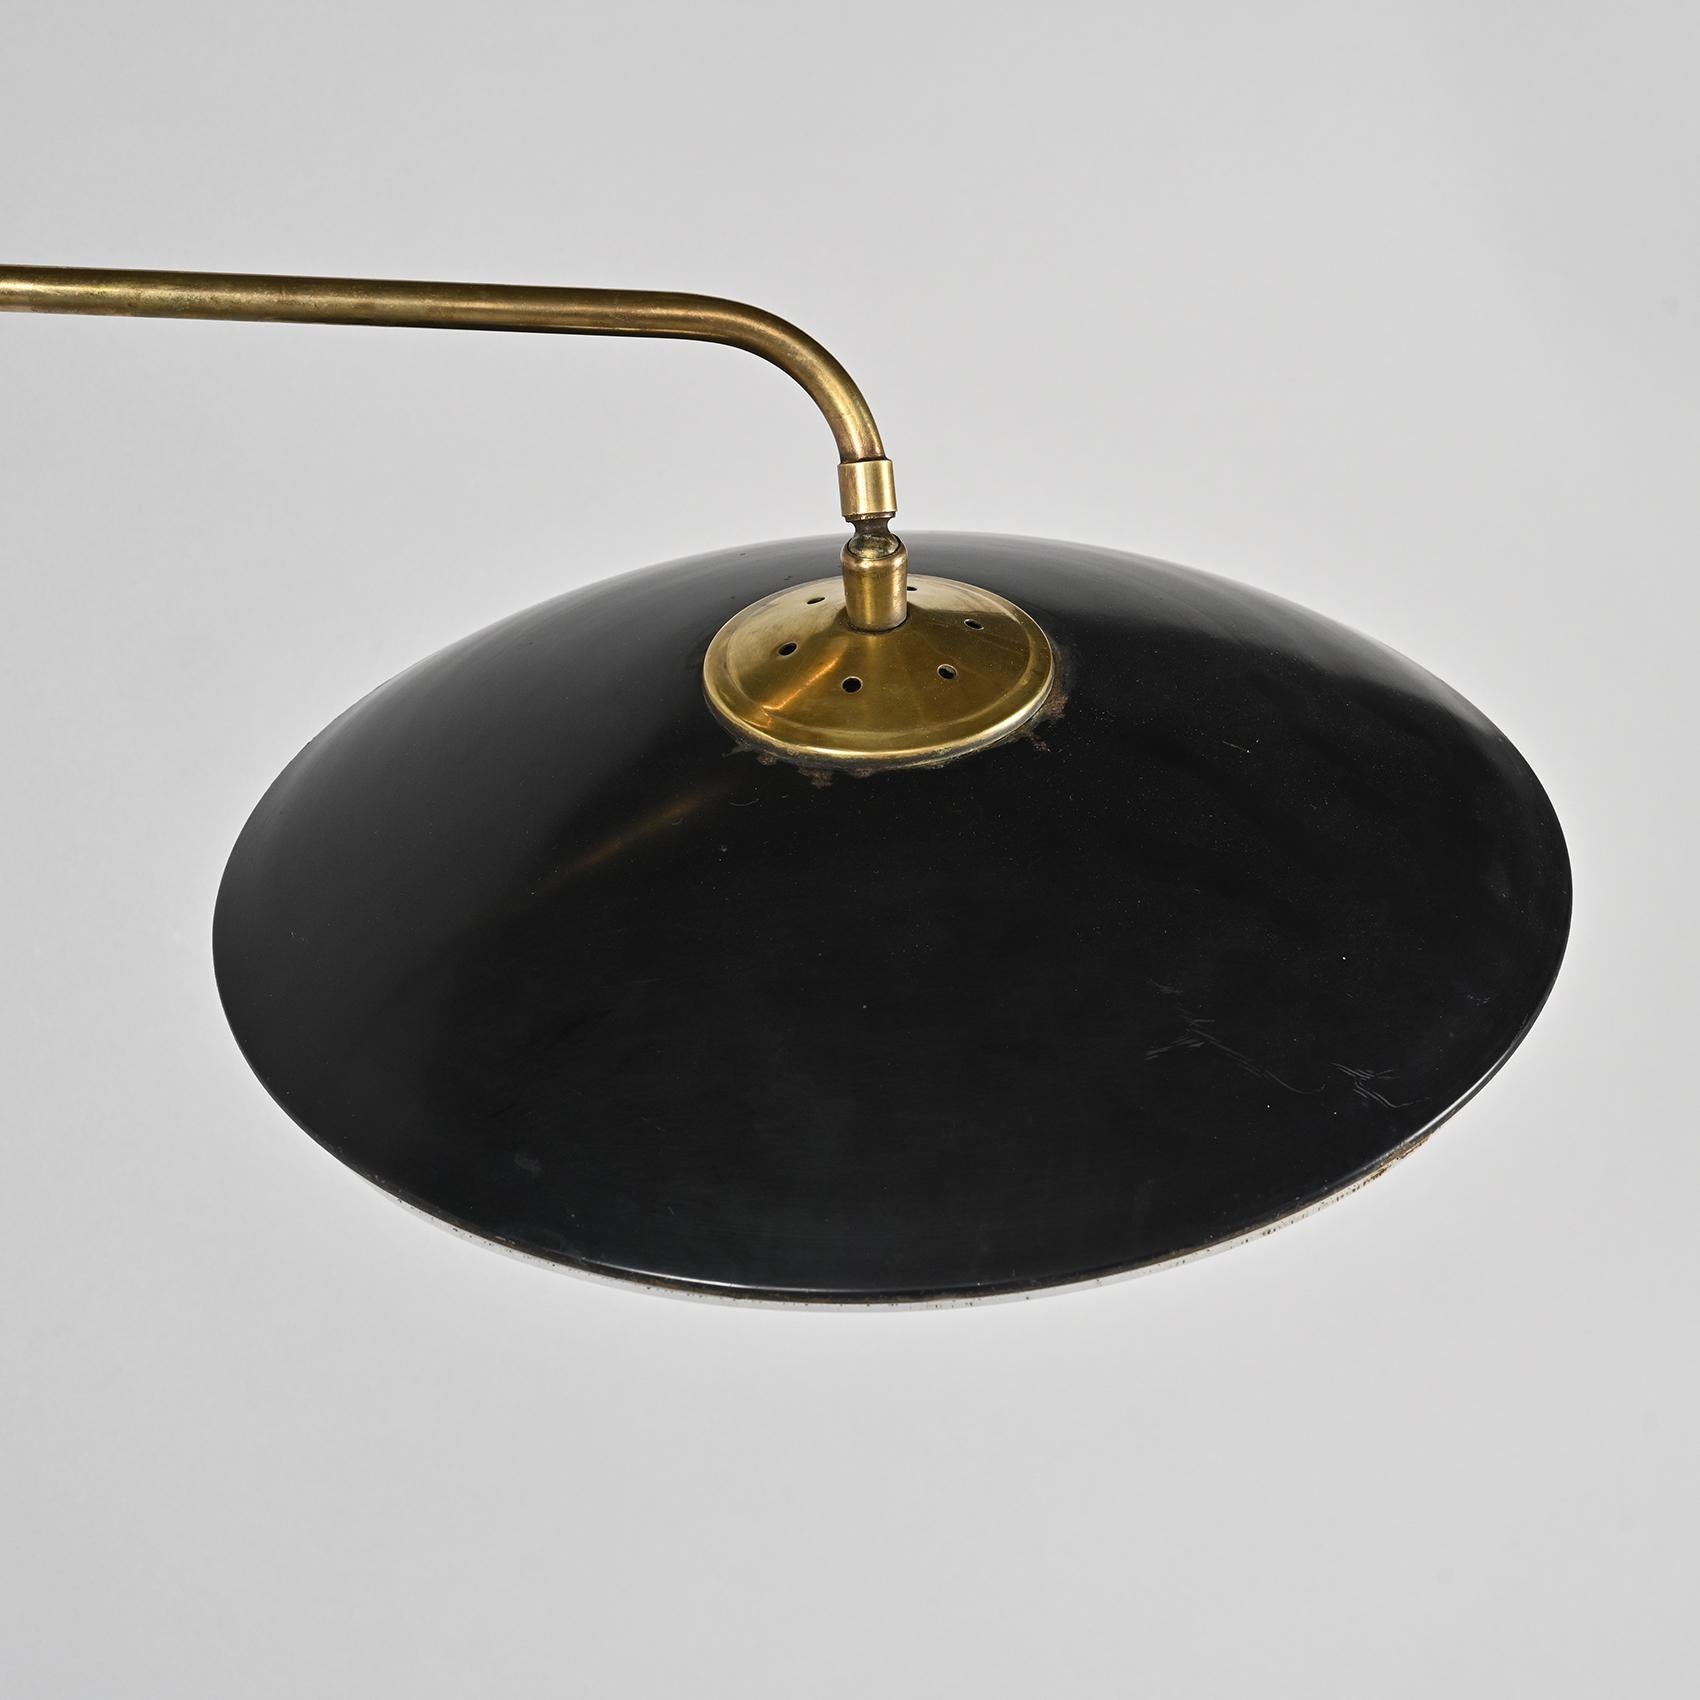 We love the 1950s modernism exuded by this set of grand wall-mounted articulated sconces, released by Maison Arlus France during the 1950s.

Emerging from the wall mount is a bent arm made of gilded brass, which upholds the saucer-shaped diffuser